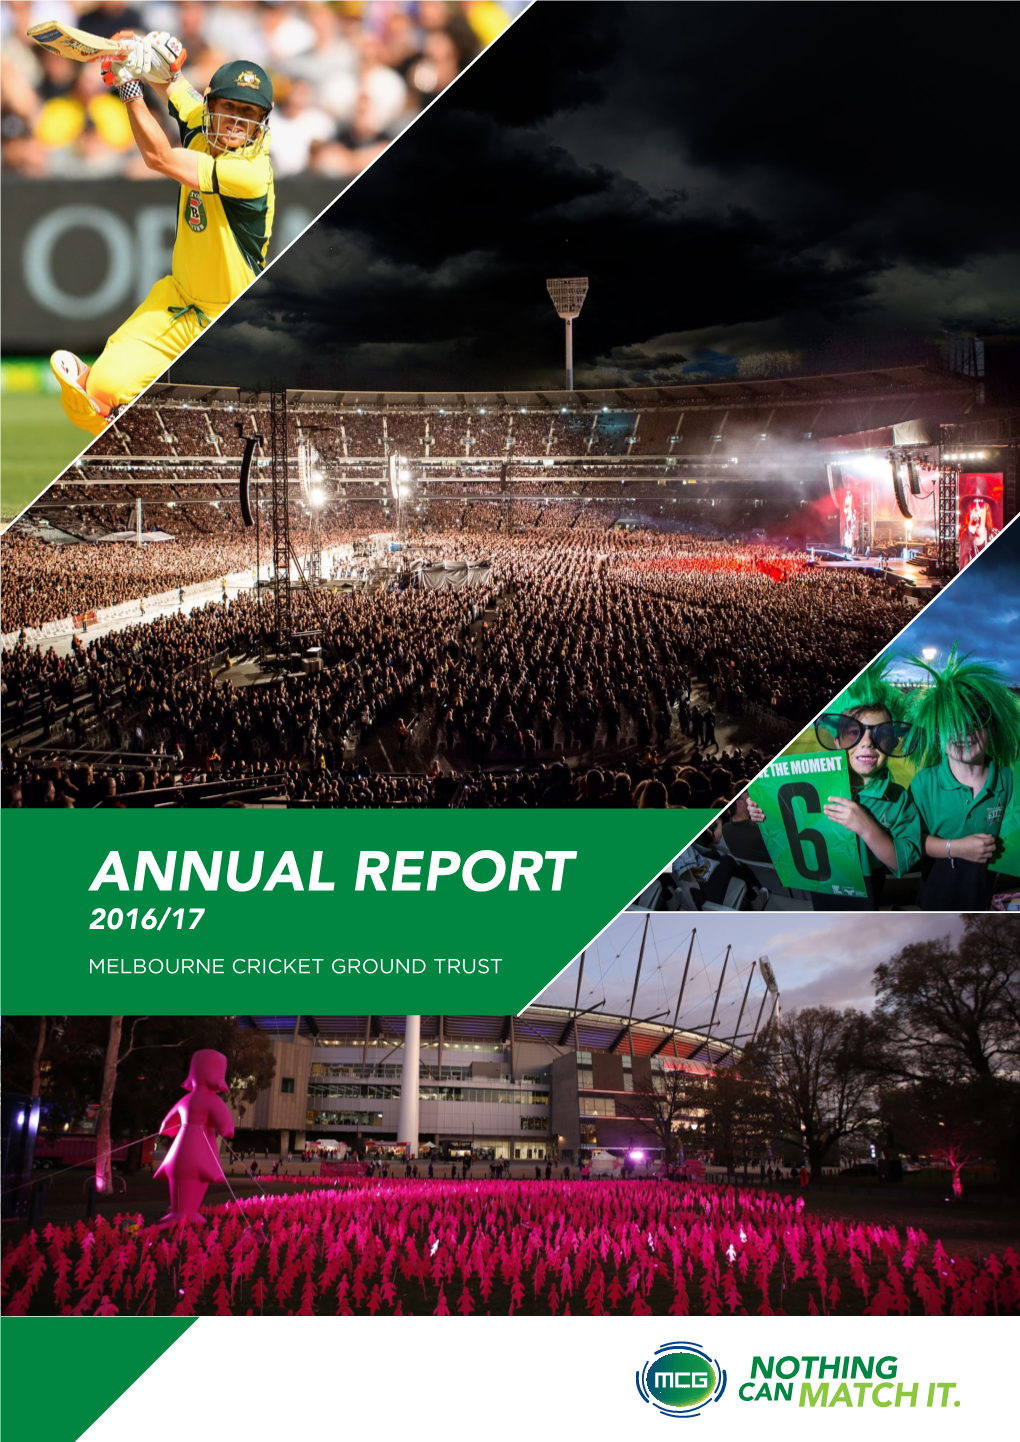 ANNUAL REPORT 2016/17 MELBOURNE CRICKET GROUND TRUST TRUSTEES of the MCG TRUST 2017 Saw the Retirement of Two Very Significant Members of the MCG Team